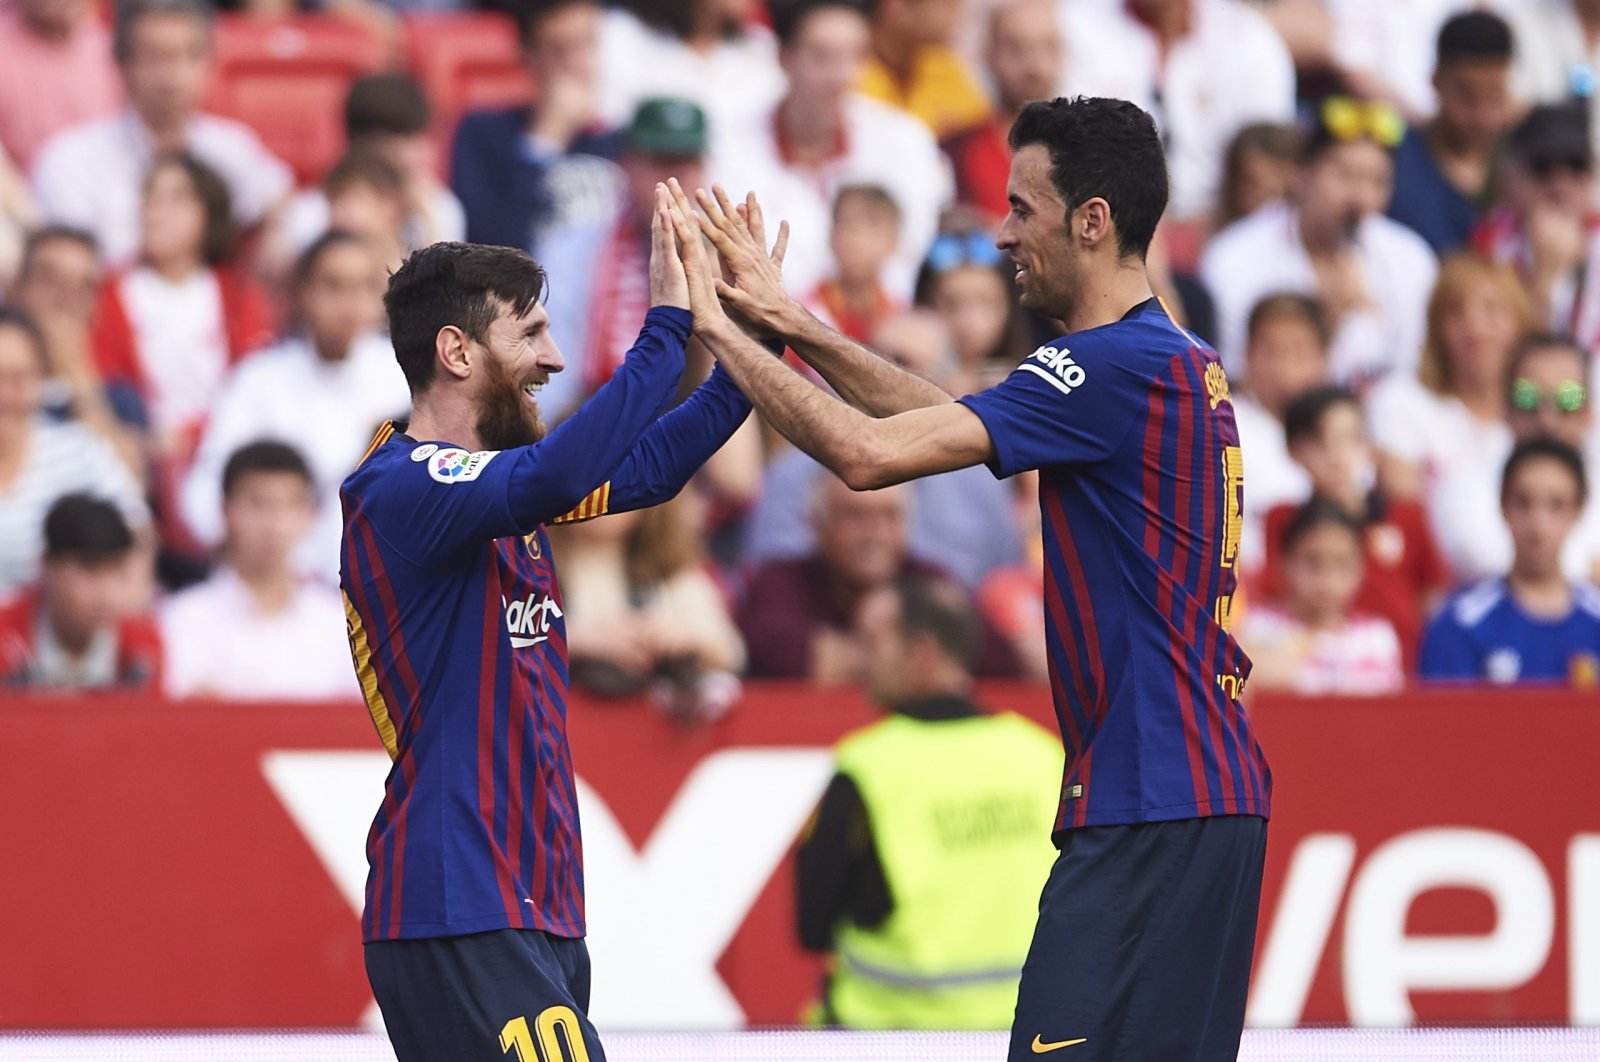 Former Barcelona players, Lionel Messi (L) and Sergio Busquets celebrate after Messi&#039;s goal against Sevilla at the Camp Nou, Barcelona, Spain, Feb. 23, 2019. (Getty Images Photo)